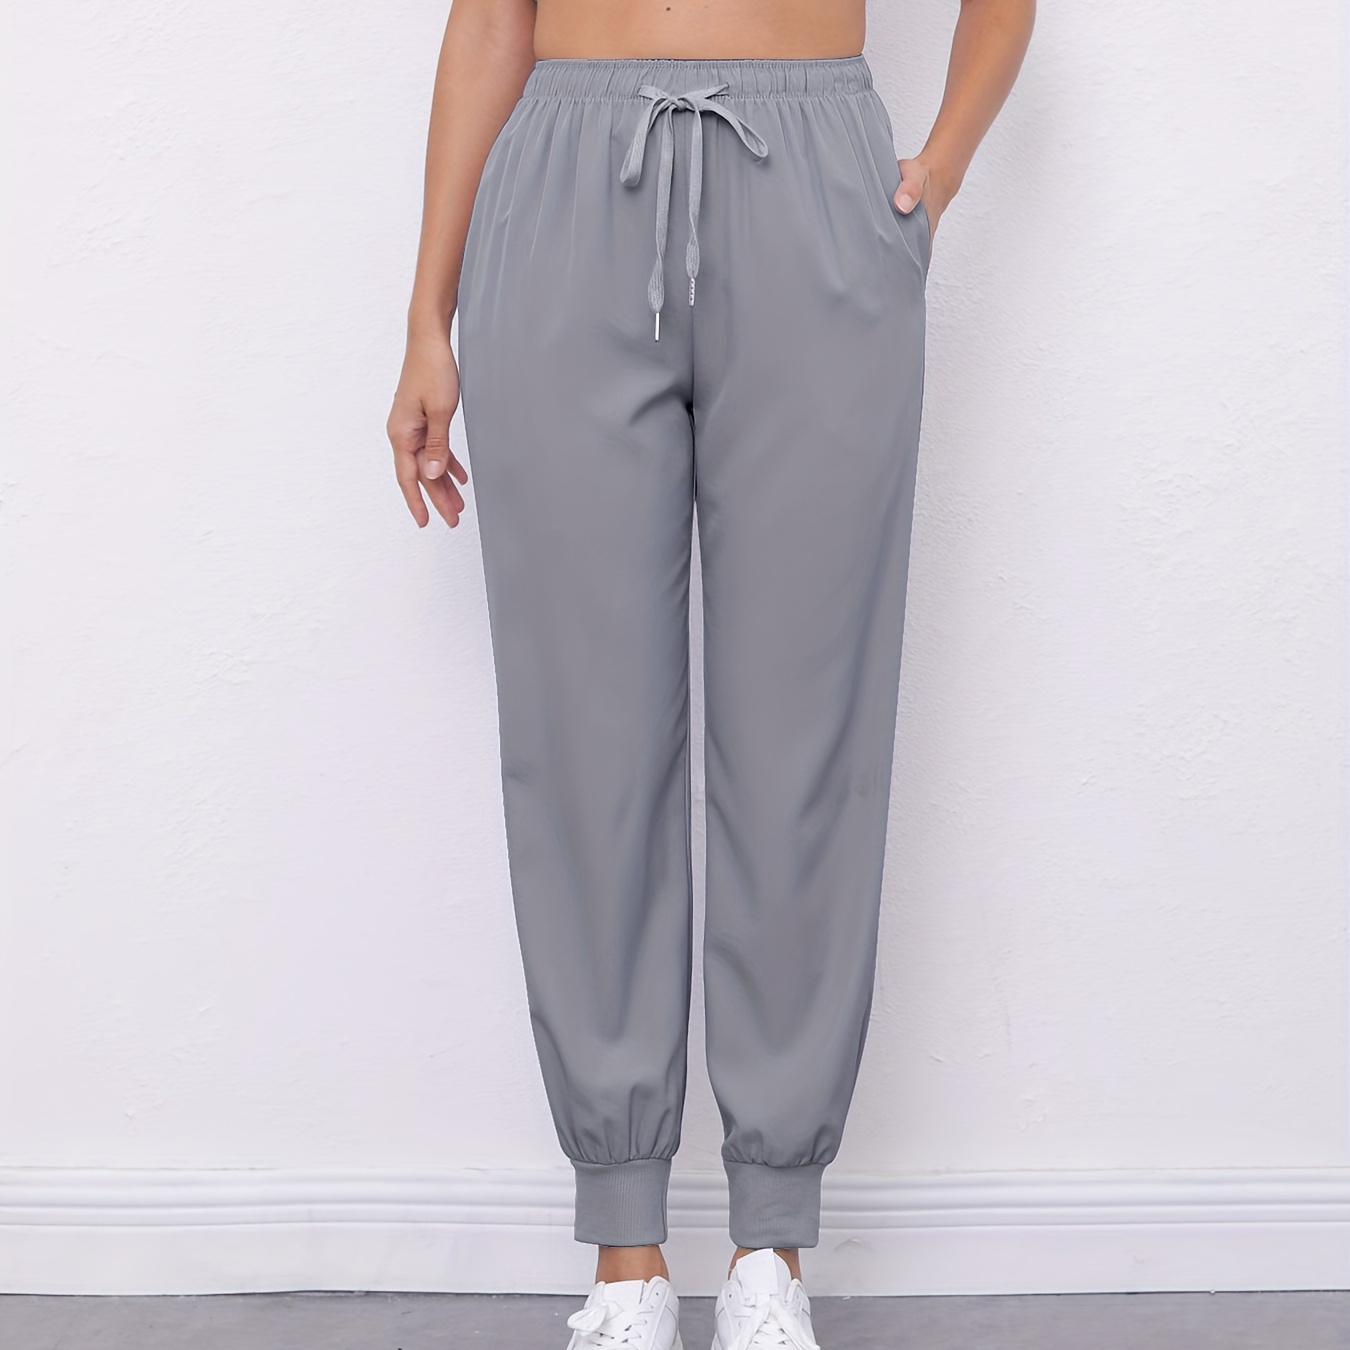 High Waisted Scrub Pants for Women with 5 Pockets Drawstring Jogger Pants  for Medical Students